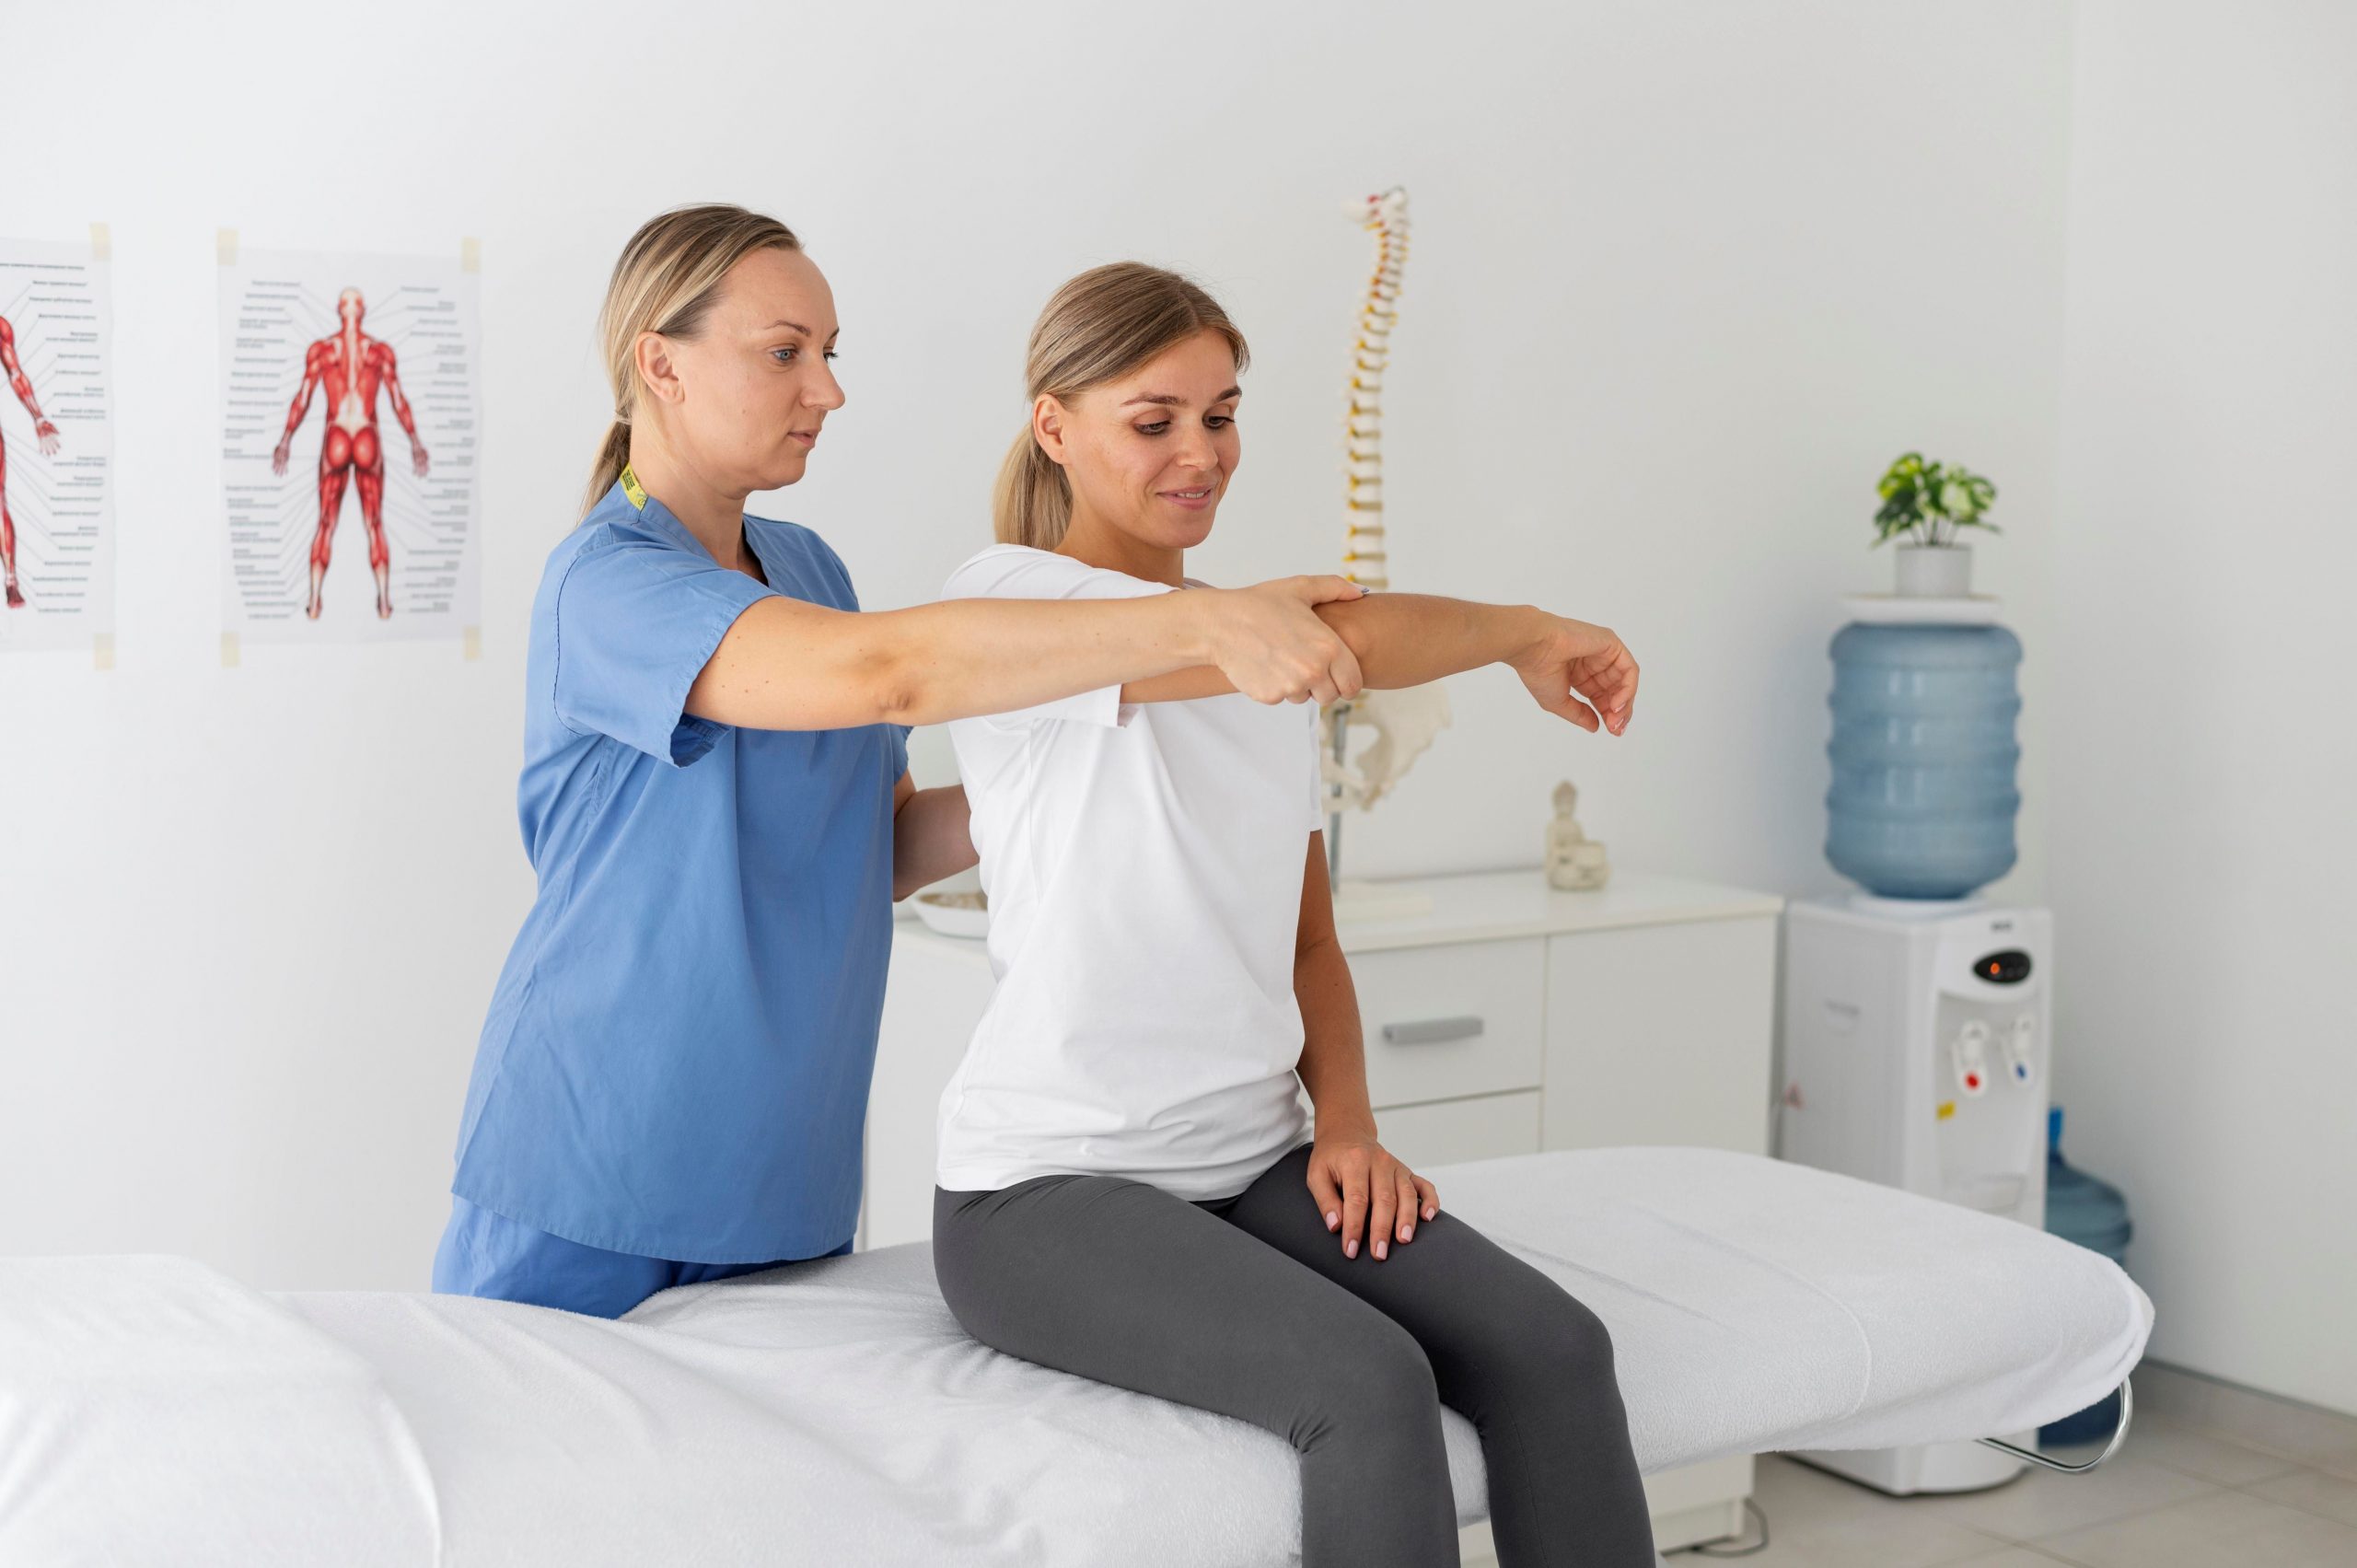 Physical therapist helping a woman overcoming workout injury